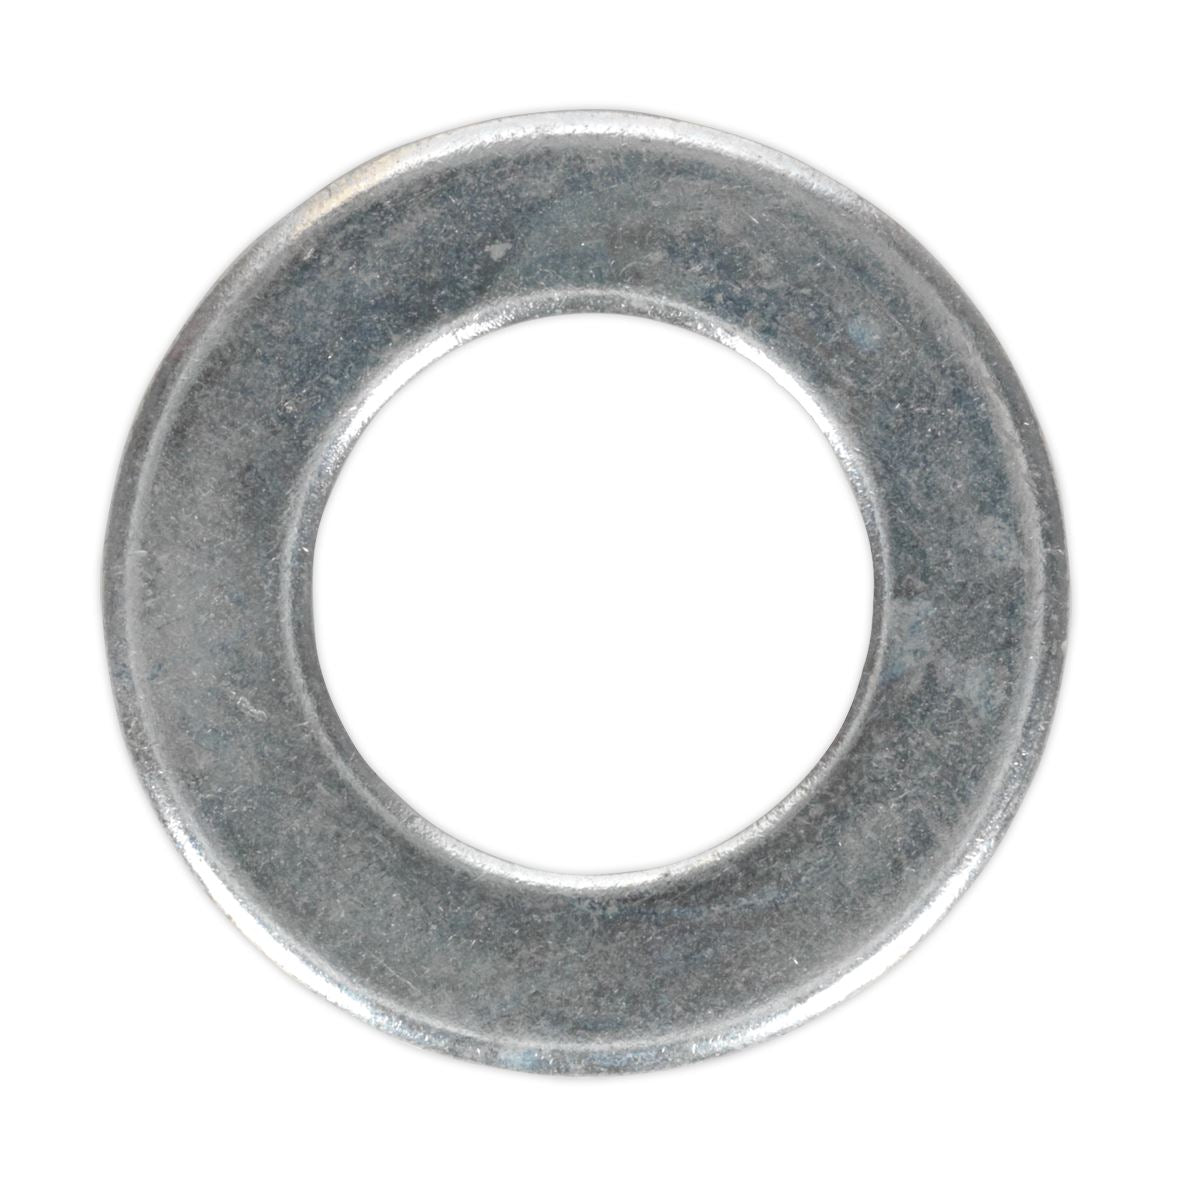 Sealey Flat Washer DIN 125 M16 x 30mm Form A Zinc Pack of 50